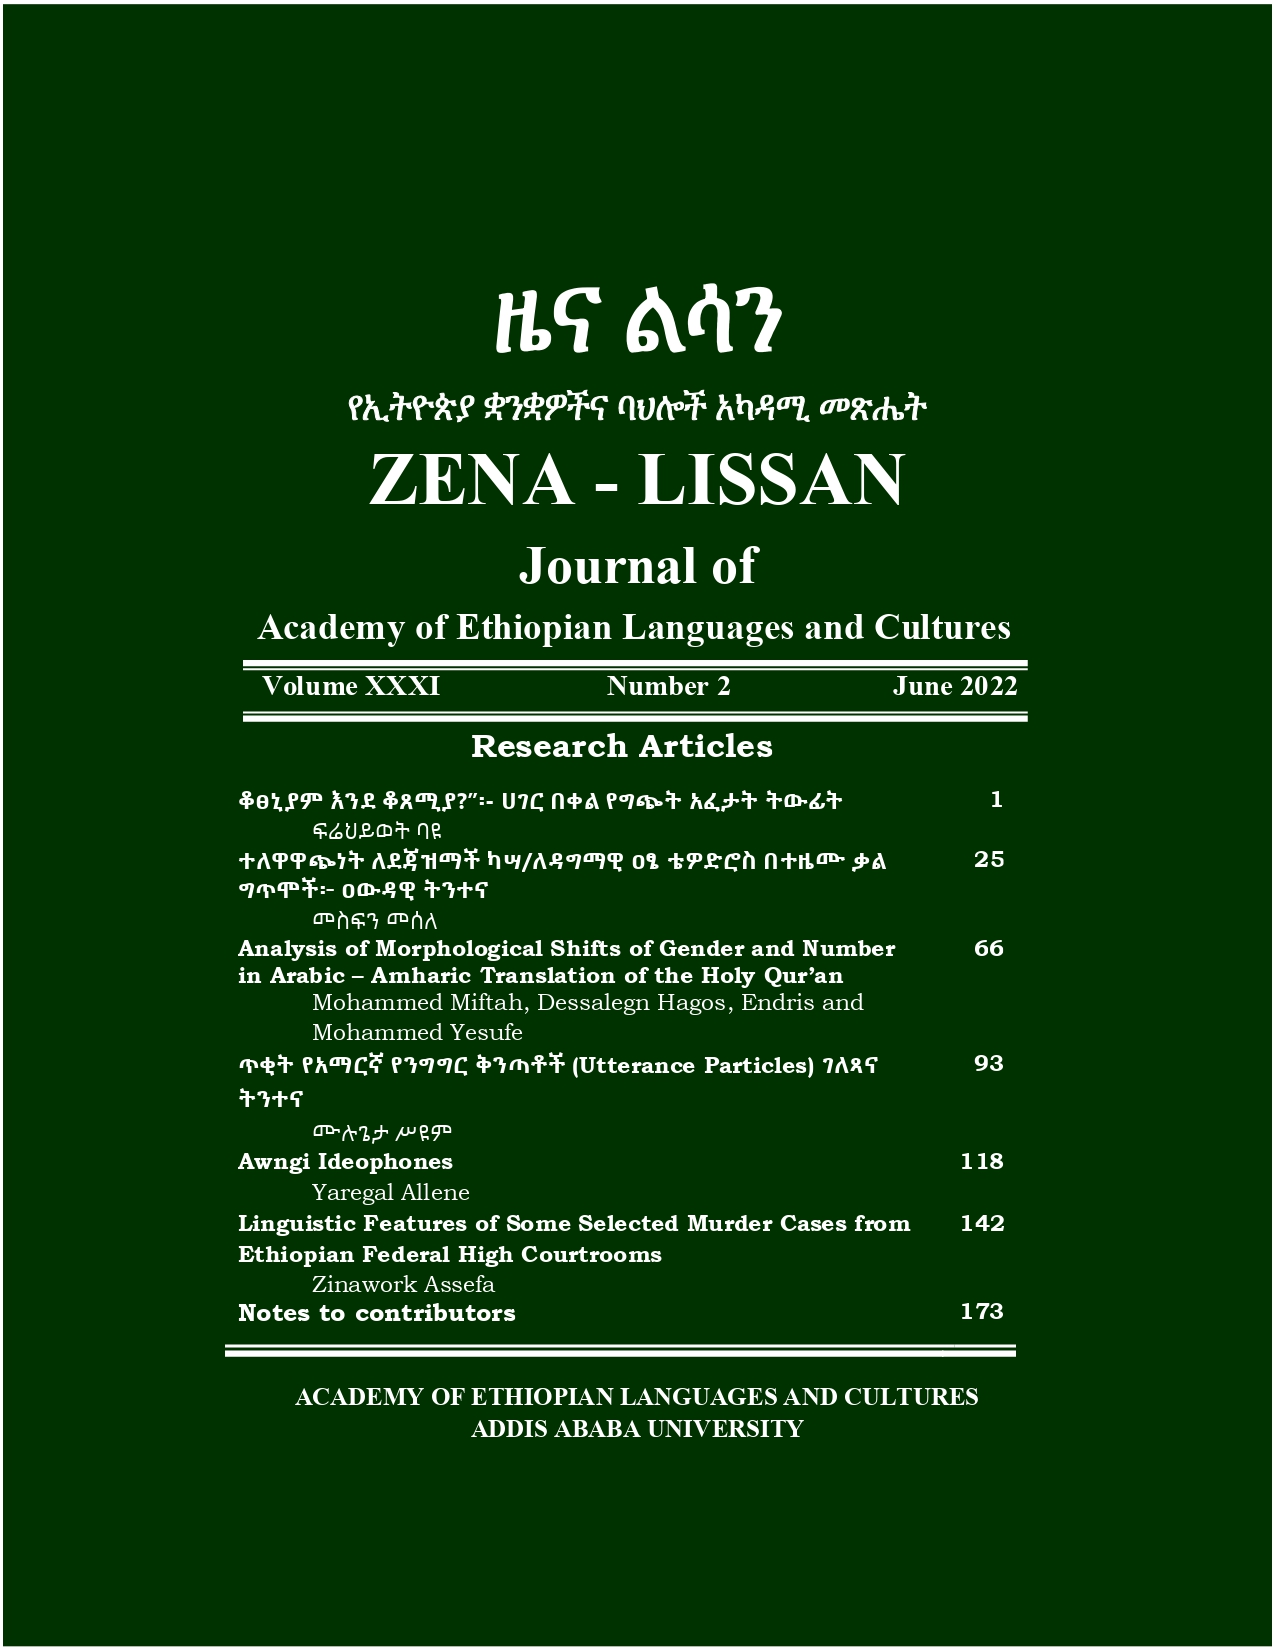 					View Vol. 31 No. 2 (2022): ZENA-LISSAN, JOURNAL OF ACADEMY OF ETHOPIAN LANGUAGES AND CULTURES
				